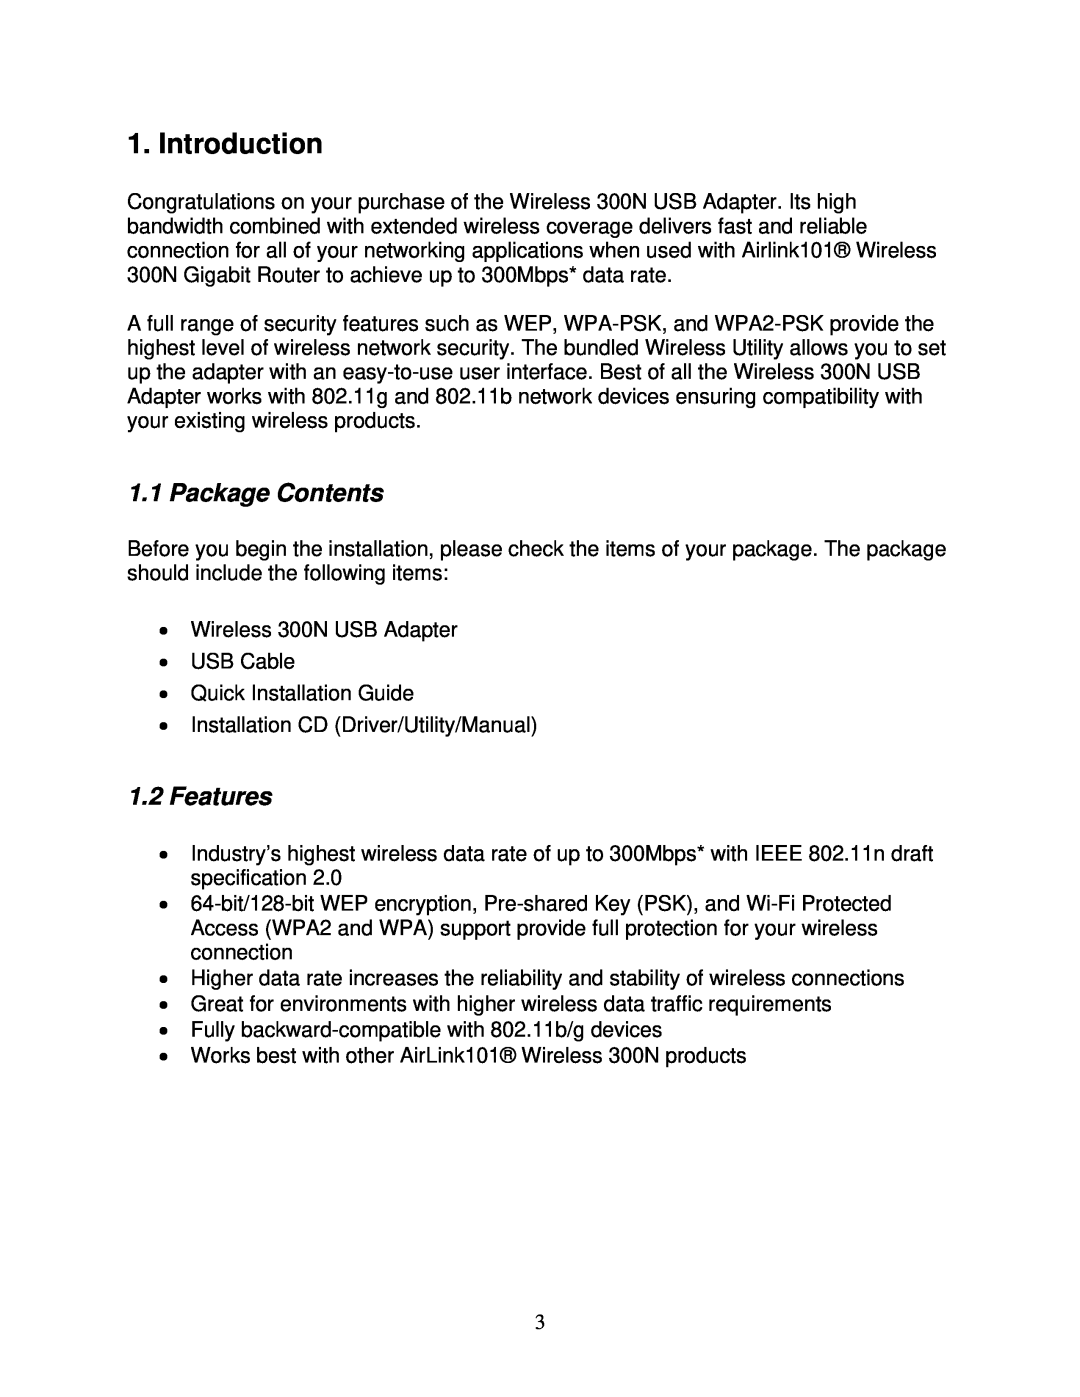 Airlink101 AWLL6090 user manual Introduction, Package Contents, Features 